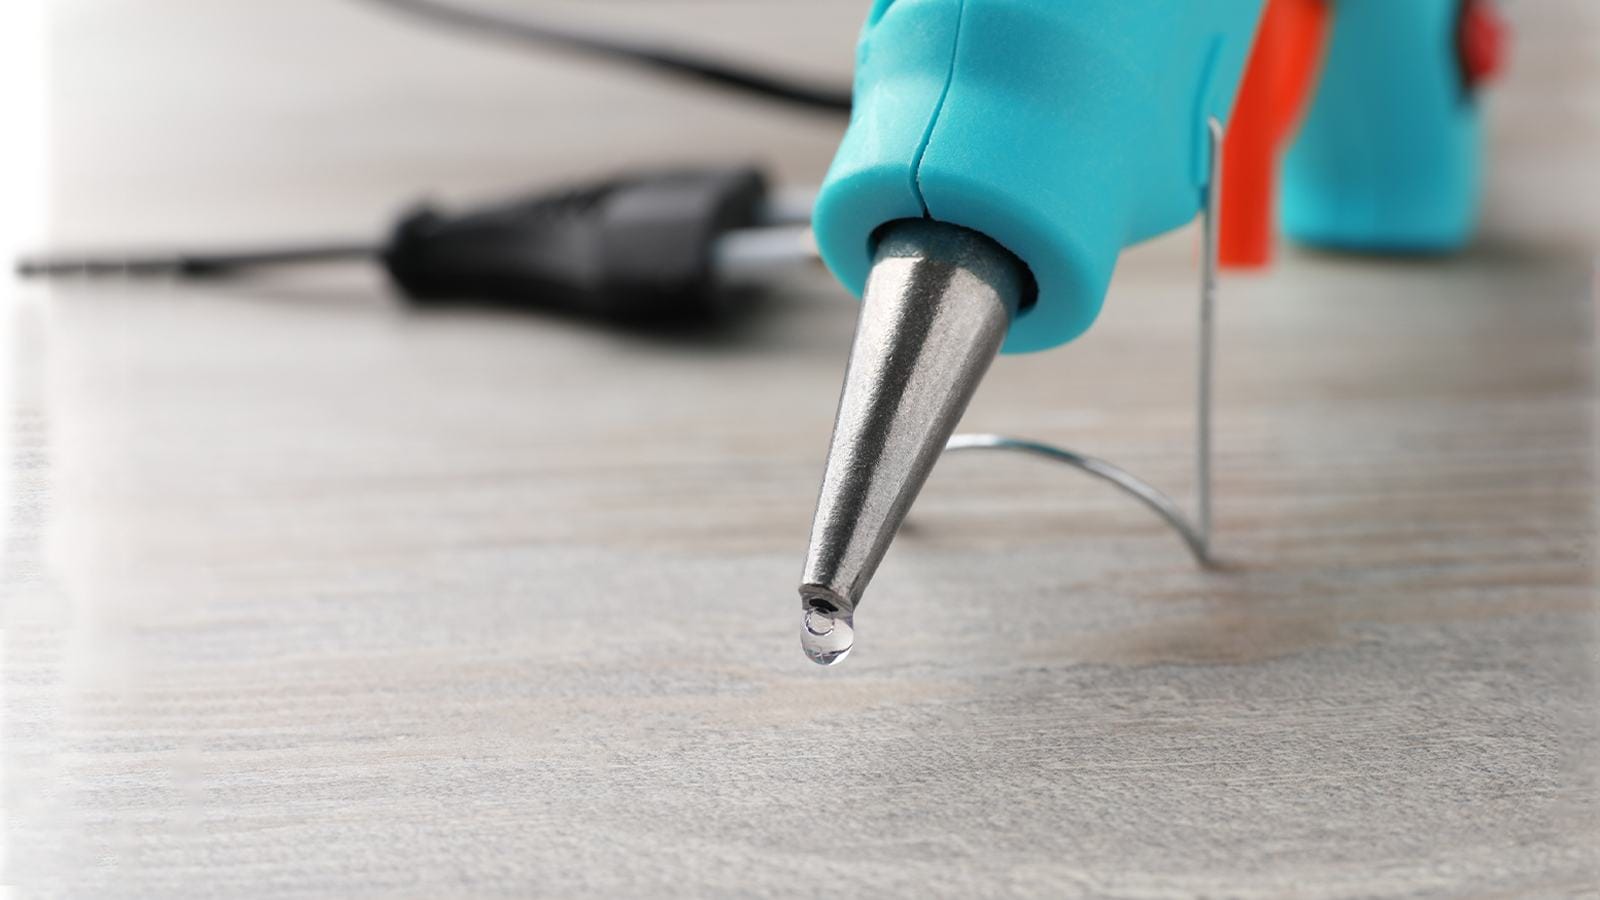 A blue electric hot glue gun on a wooden table.